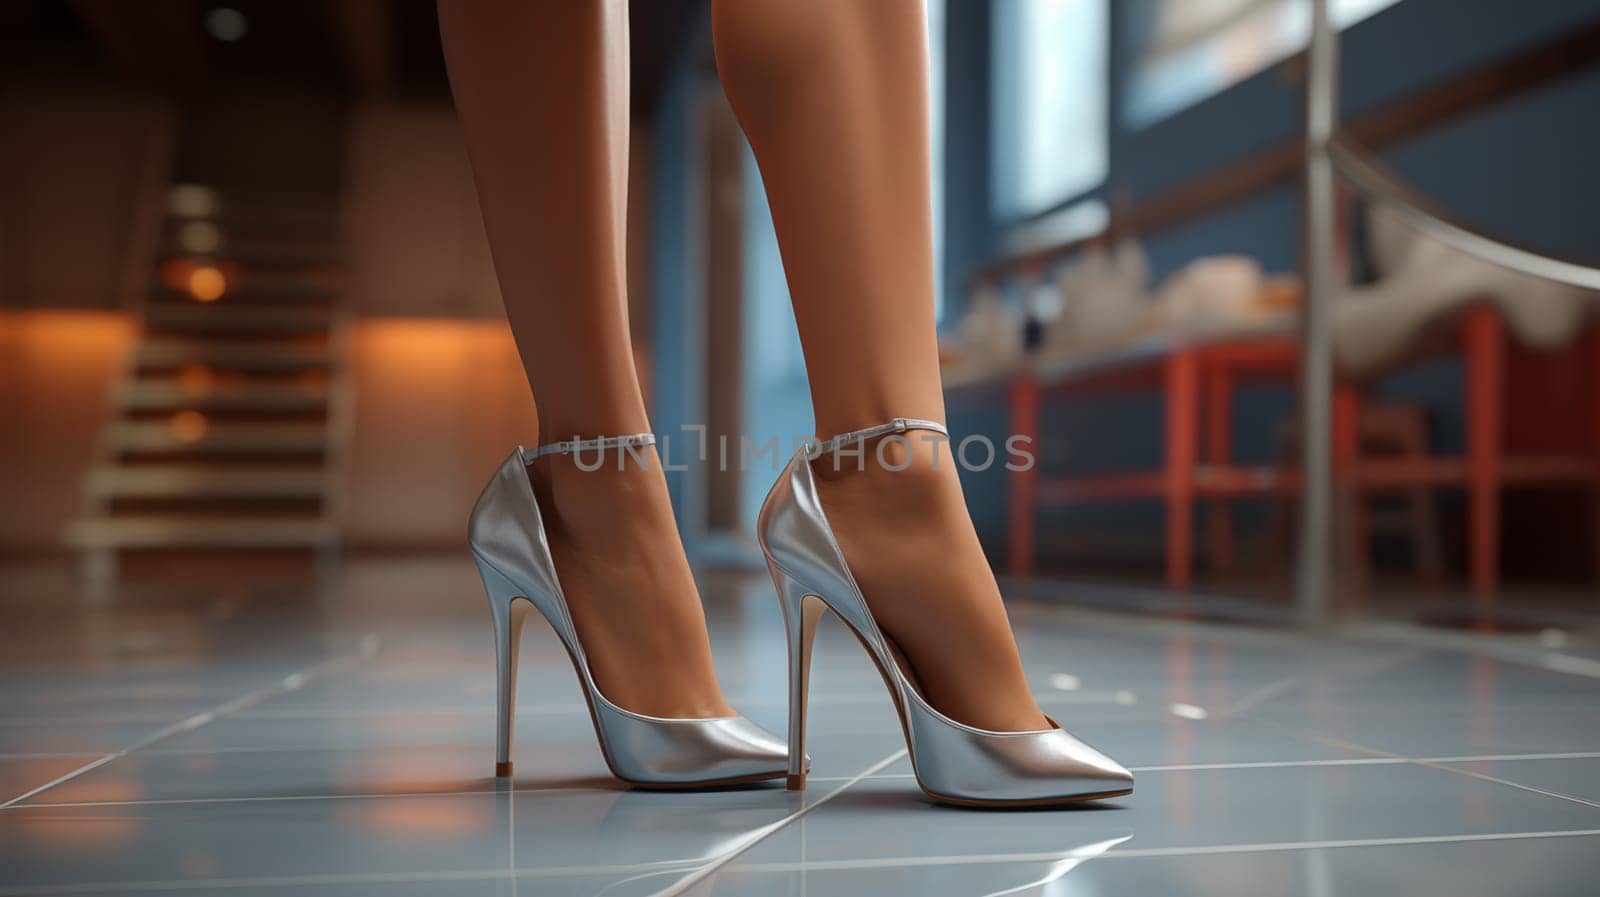 A woman's legs in silver high heels, poised on a sleek interior floor by Zakharova